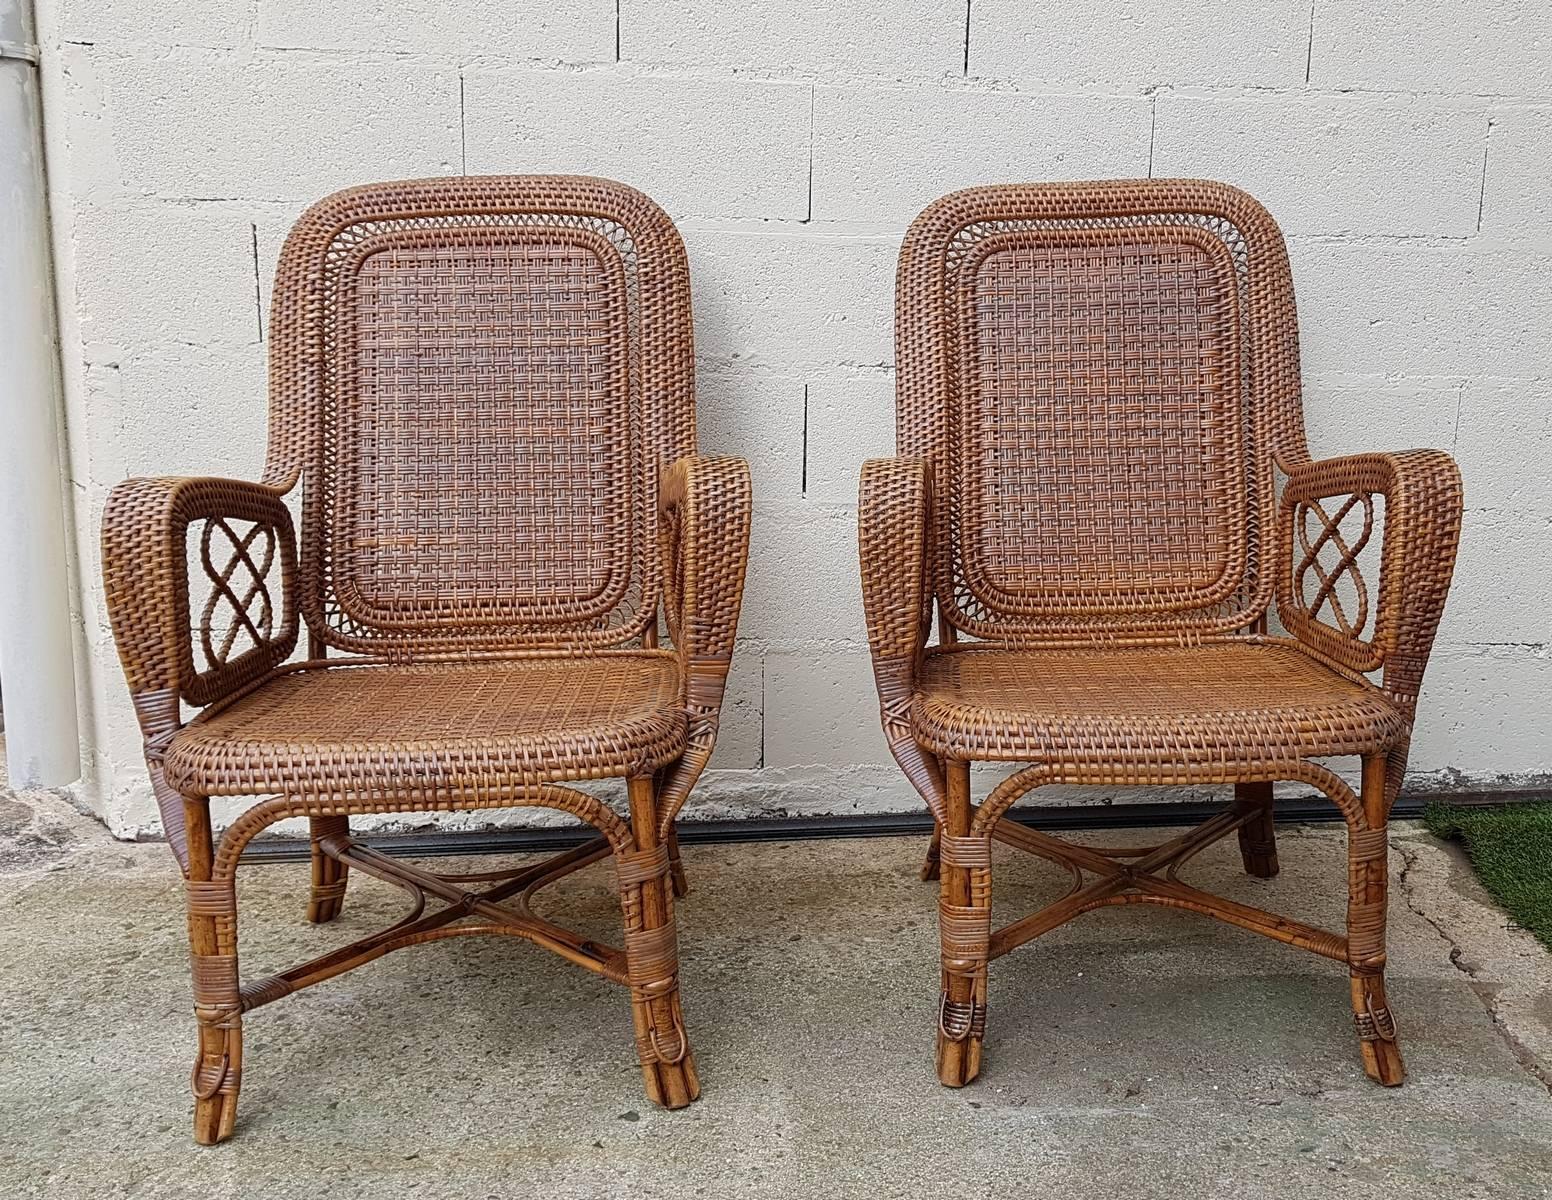 Perret & Vibert, Pair of Large Rattan Armchairs, France, End of 19th Century 1